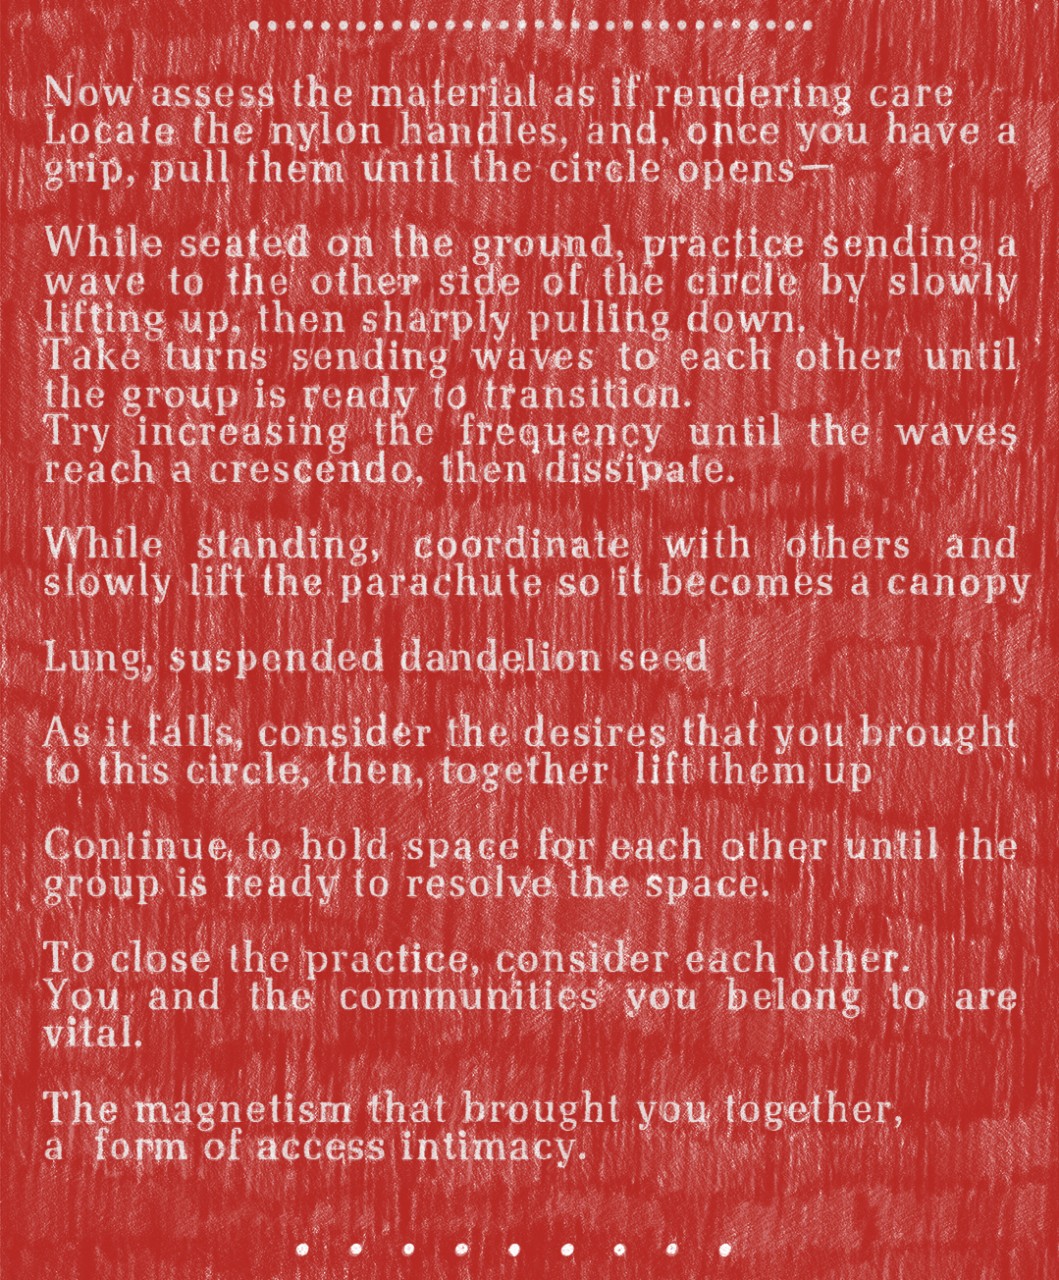 A text written on a scroll-like document, broken into three sections, made of layers of pastels blended with oil crayon that create contrasts of thick and thin. It begins with a background of loosely-drawn hatch marks in an urgent, firetruck red on white paper. The marks are drawn with intentionality but with a DIY feel in rows from top to bottom: repetitive gestures filling the page, tally marks slowing down the reader and hinting at the time taken to create each and every mark. Overlaid on the hatch marks, the text is chalky white in a font reminiscent of a typewriter in its near, but not complete, uniformity. The hatch marks interrupt the text, almost animating the words with their vibrations, keeping the words from sticking to the page, even taking over at times. Although the letters are more opaque, they’re effortful to read against the hand-drawn marks. The text is laid out in sections: the first is a numbered set of steps, the second is lyrical and poetic, and the final section summarizes the two above. The beginning and ending of each section are marked by a row of drawn white circles, extended strings of ellipses.  Text on the document is all left-aligned and the second section reads as follows:  …………………………..  Now assess the material as if rendering care Locate the nylon handles, and, once you have a grip, pull them until the circle opens—  While seated on the ground, practice sending a wave to the other side of the circle by slowly lifting up, then sharply pulling down. Take turns sending waves to each other until the group is ready to transition. Try increasing the frequency until the waves reach a crescendo, then dissipate.  While standing, coordinate with others and slowly lift the parachute so it becomes a canopy  Lung, suspended dandelion seed  As it falls, consider the desires that you brought to this circle, then, together lift them up  Continue to hold space for each other until the group is ready to resolve the space.  To close the practice, consider each other. You and the communities you belong to are vital.  The magnetism that brought you together, a form of access intimacy.  . . . . . . . . .